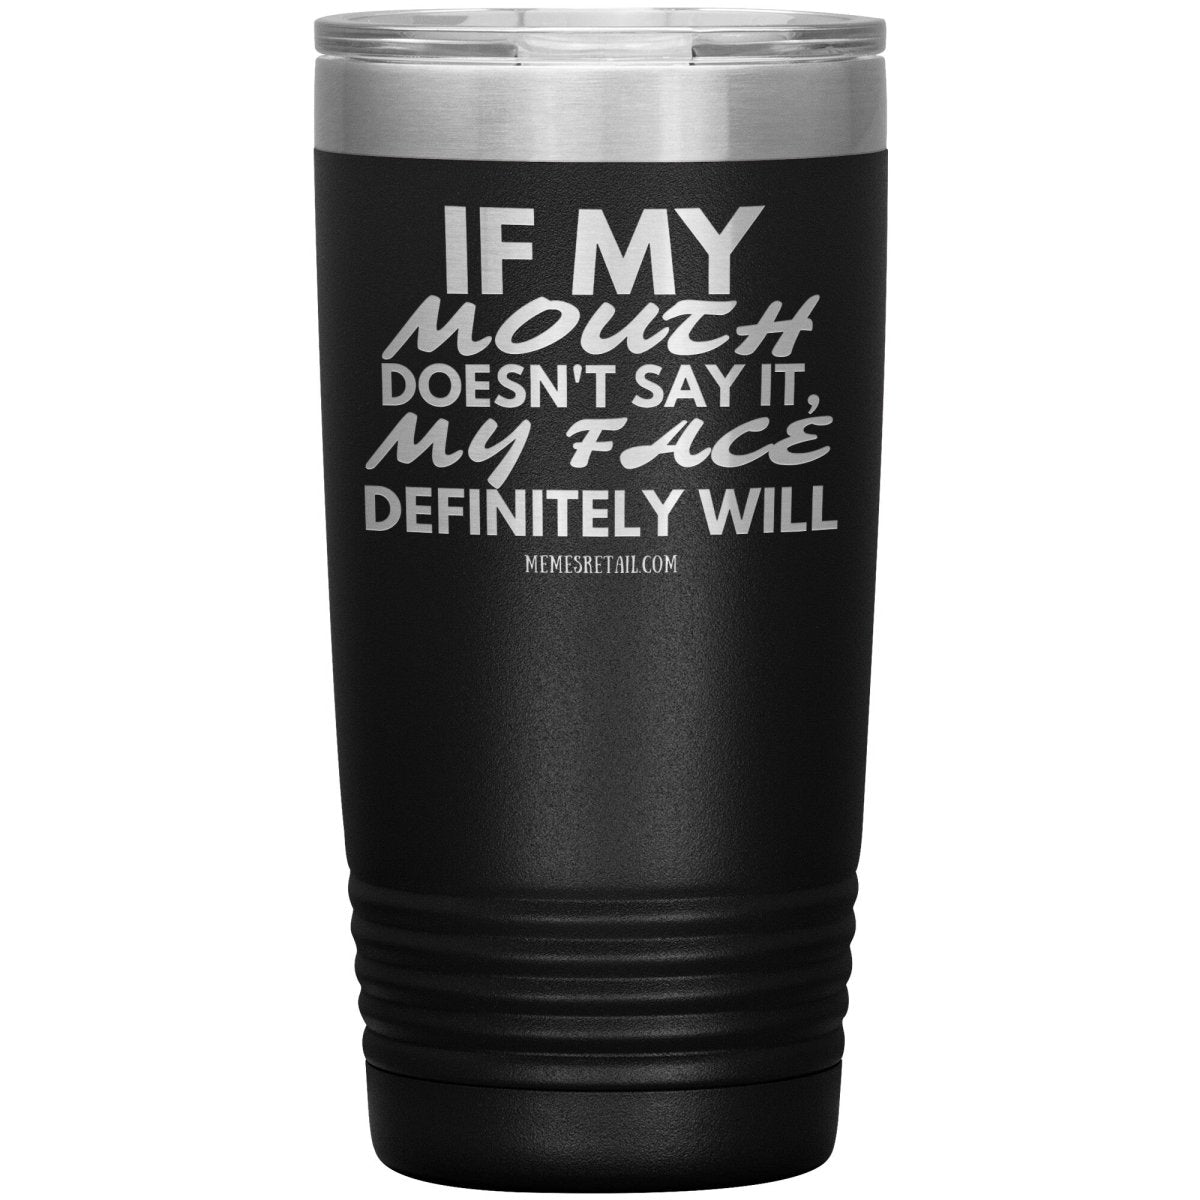 If my mouth doesn't say it, my face definitely will Tumblers, 20oz Insulated Tumbler / Black - MemesRetail.com